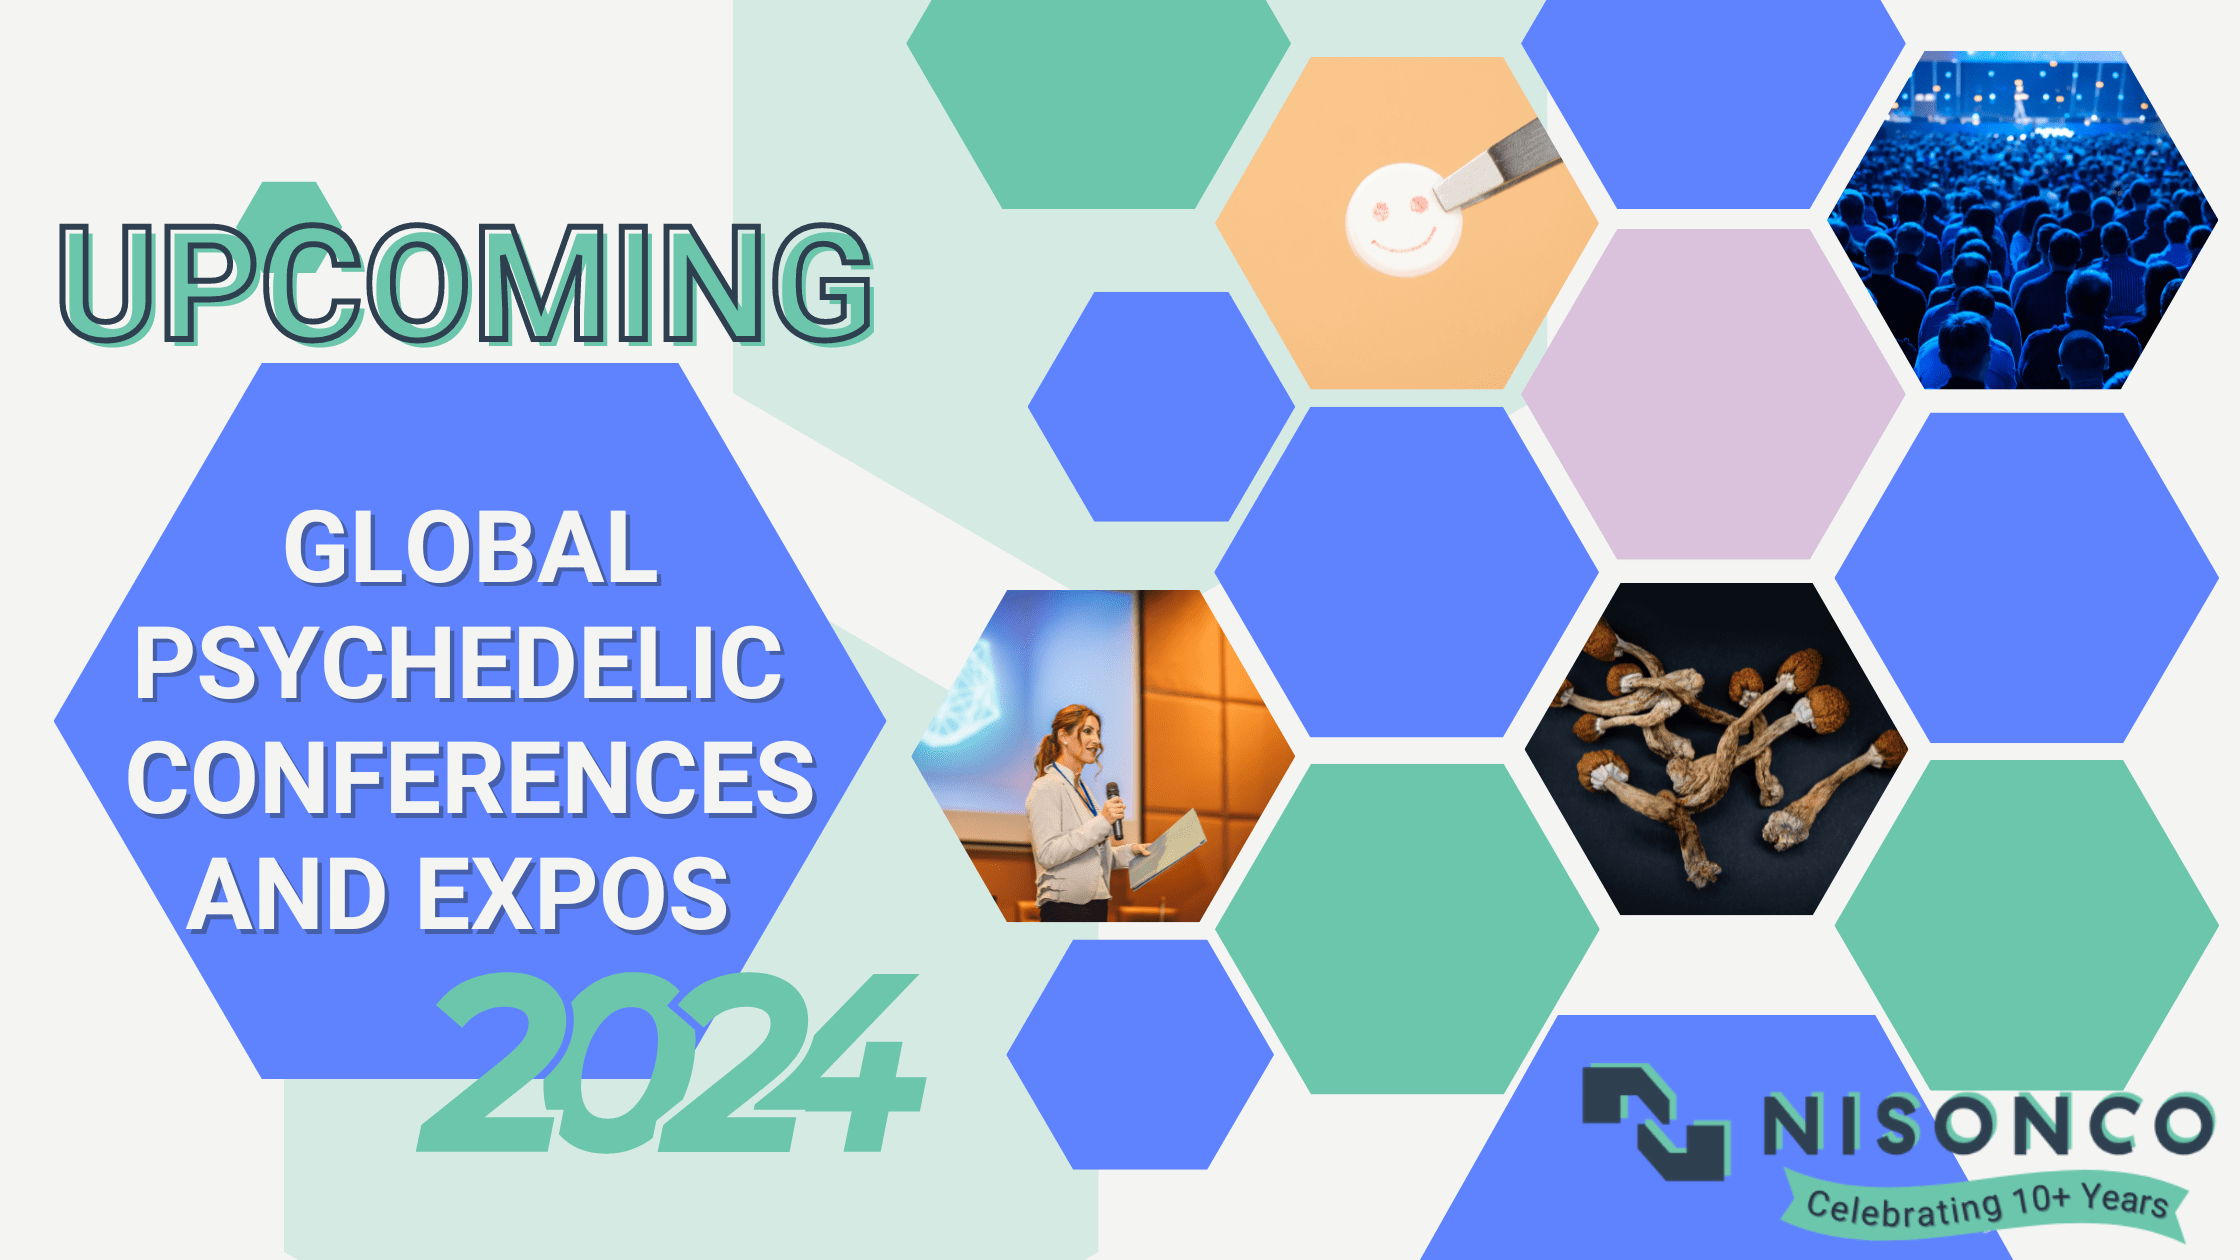 The text 'Upcoming Global Psychedelic Conferences & Expos 2024' is to the left of a hexagonal design showing trade show speakers, expo attendees, psychedelic mushrooms and ecstasy.